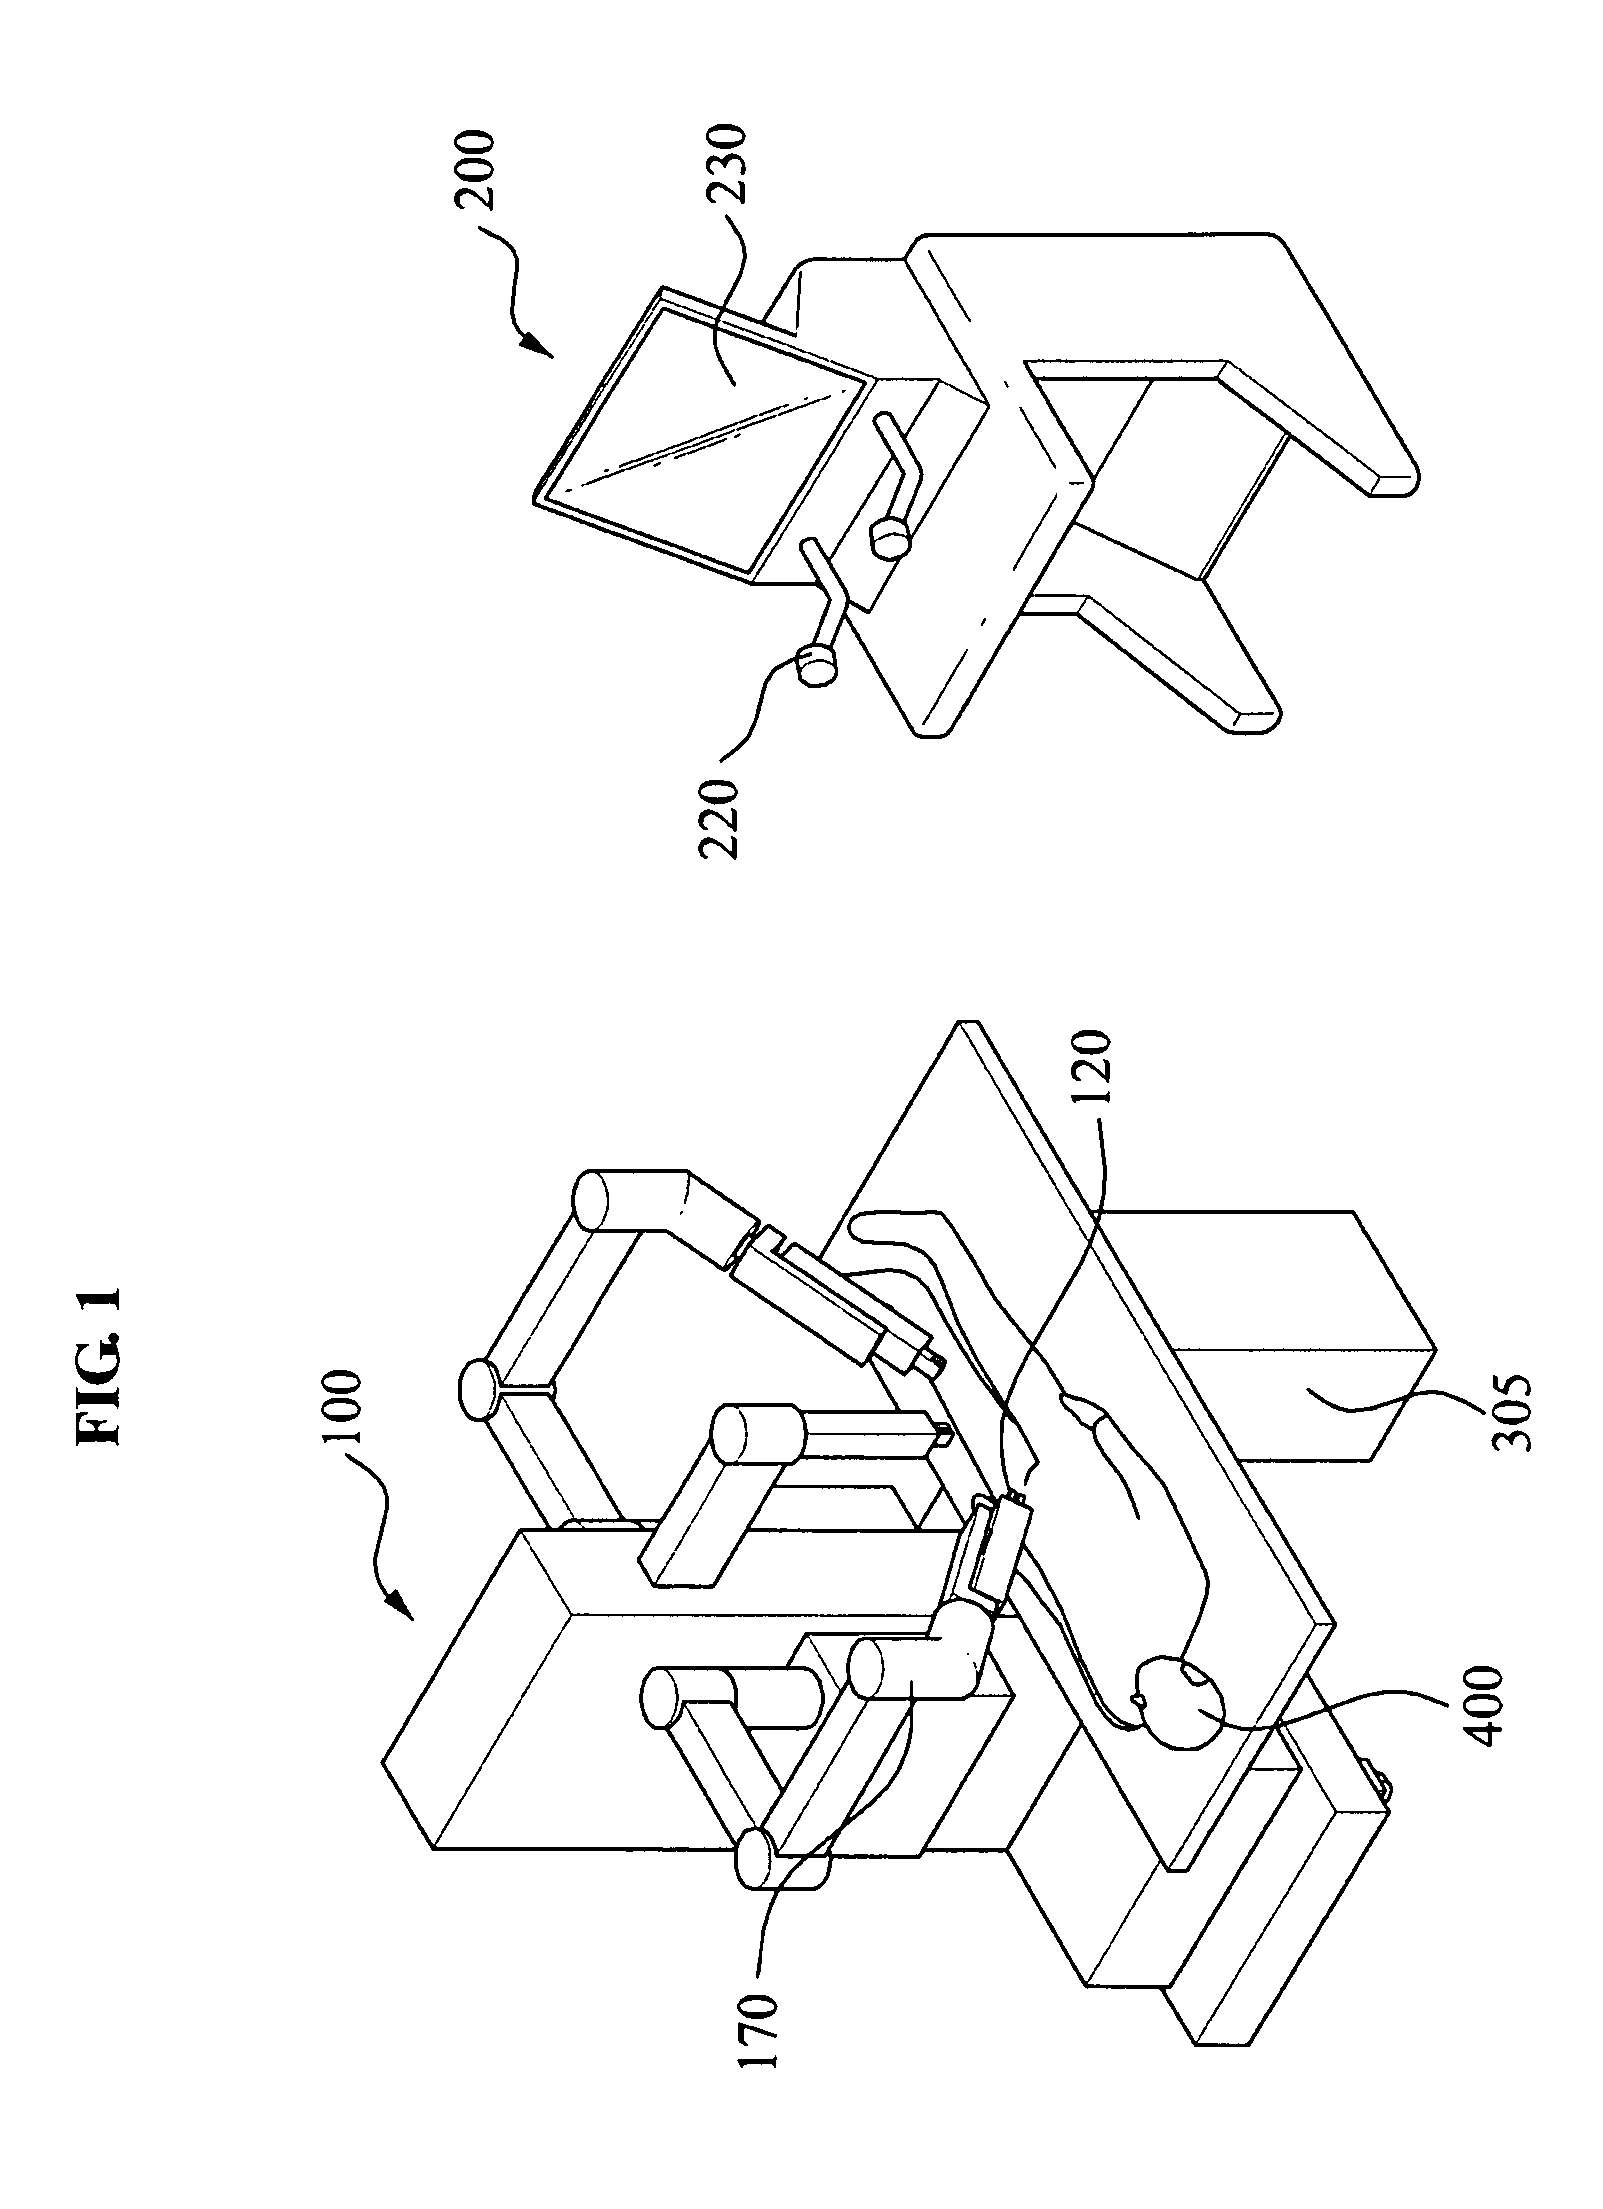 Surgery robot system, surgery apparatus and method for providing tactile feedback